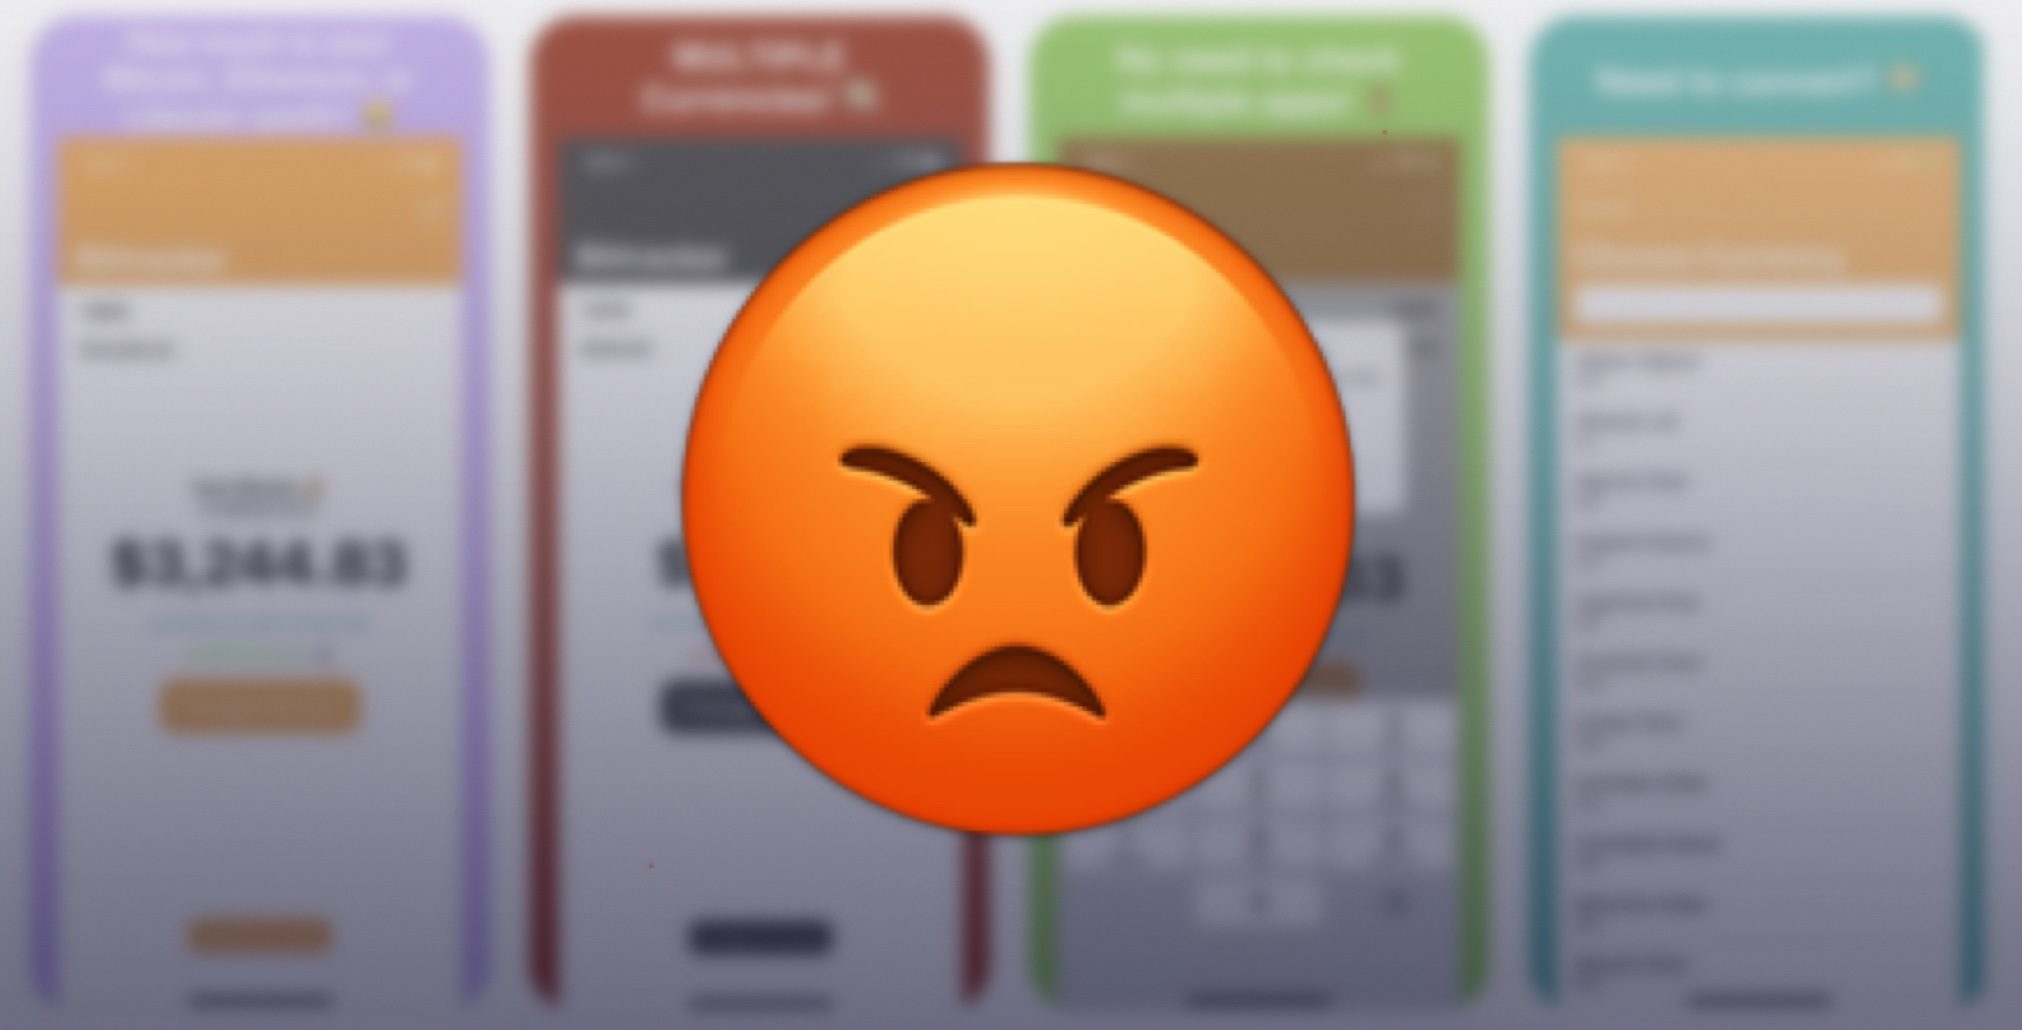 App Review Rejecting Apps That Use Apple Emoji for User Interface Icons